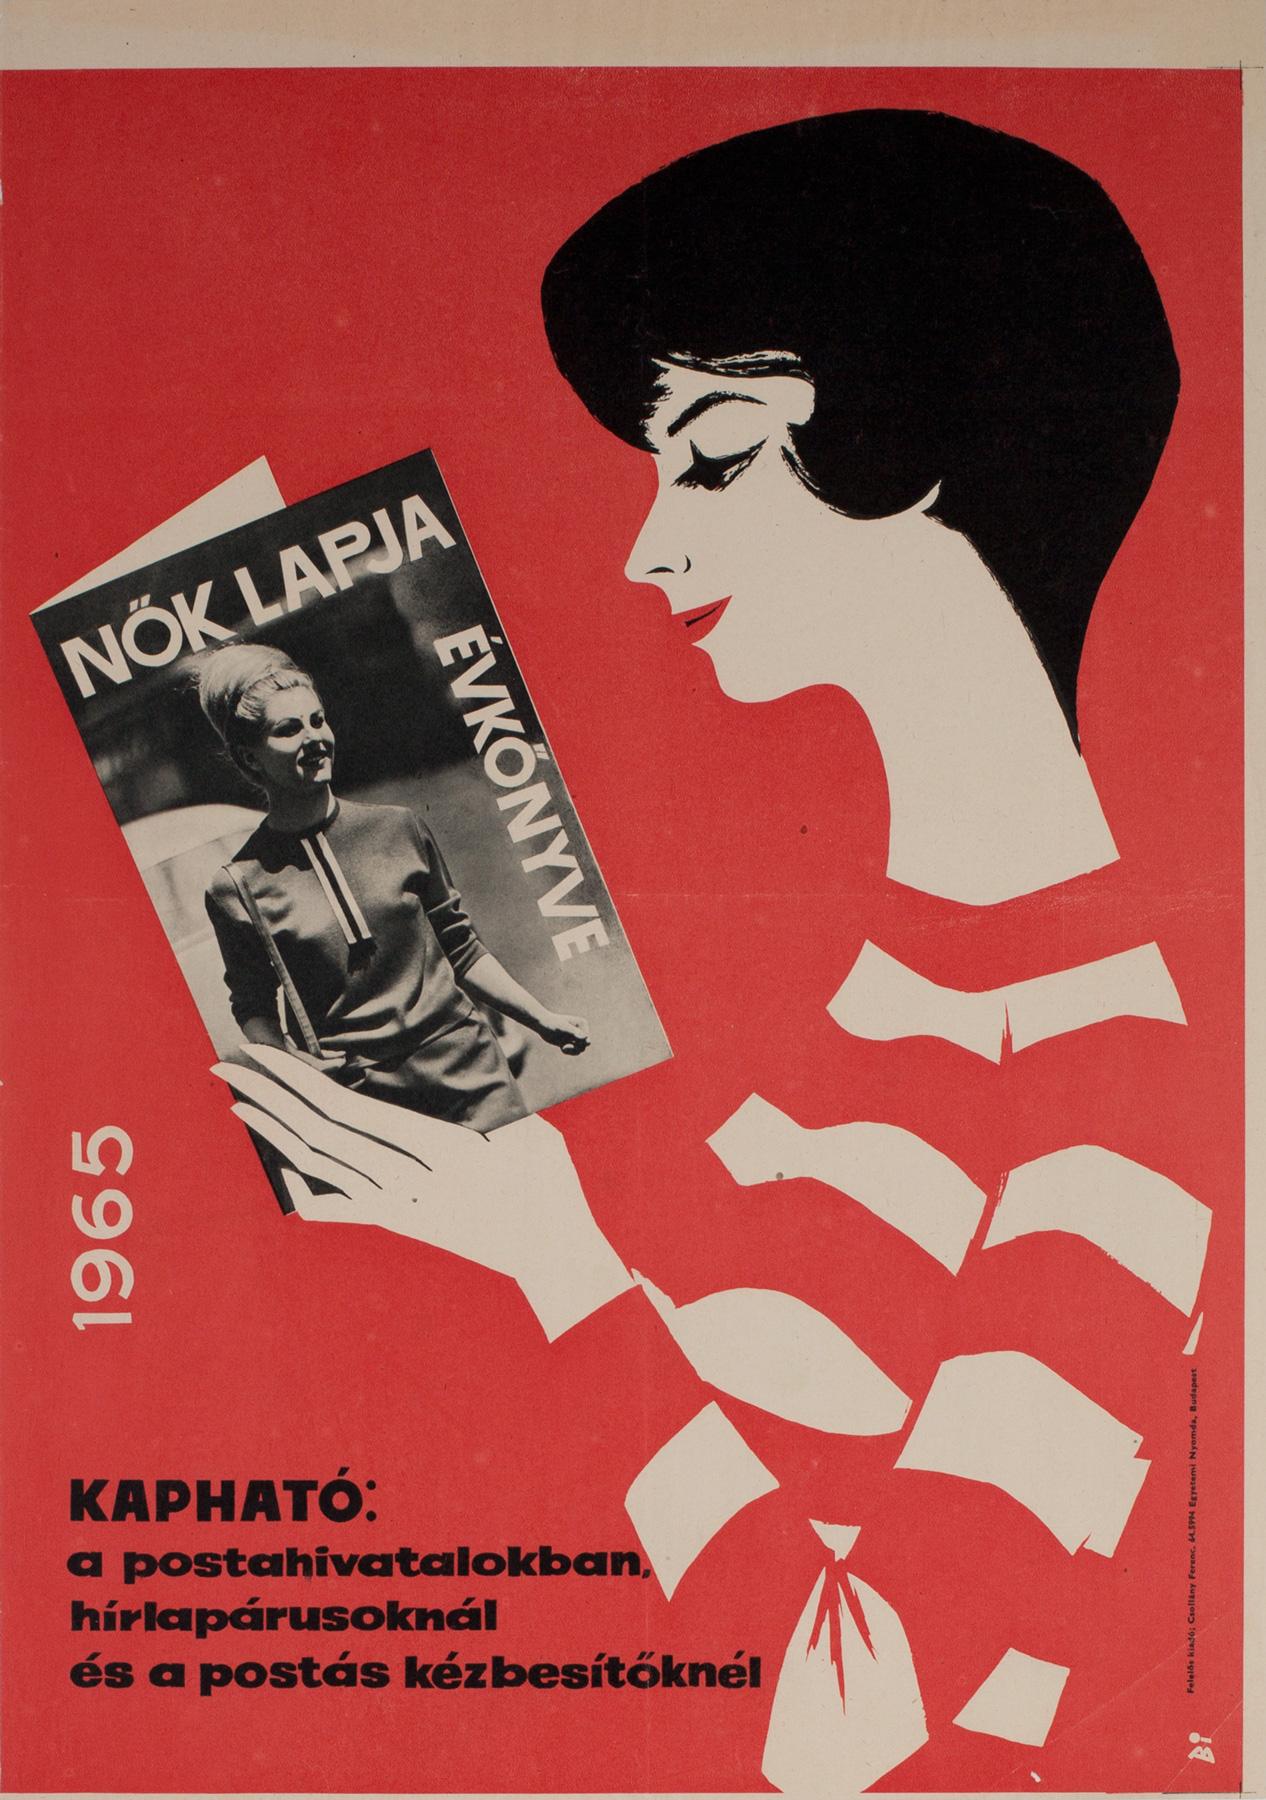 A rare and wonderful Hungarian advertising poster from 1964 to advertise the Nok Lapja Yearbook, Women’s Newspaper, 1965. Fabulous design by Istvan Balogh.

This original vintage poster is sized 18 3/4 x 26 5/8 inches and in near mint/mint